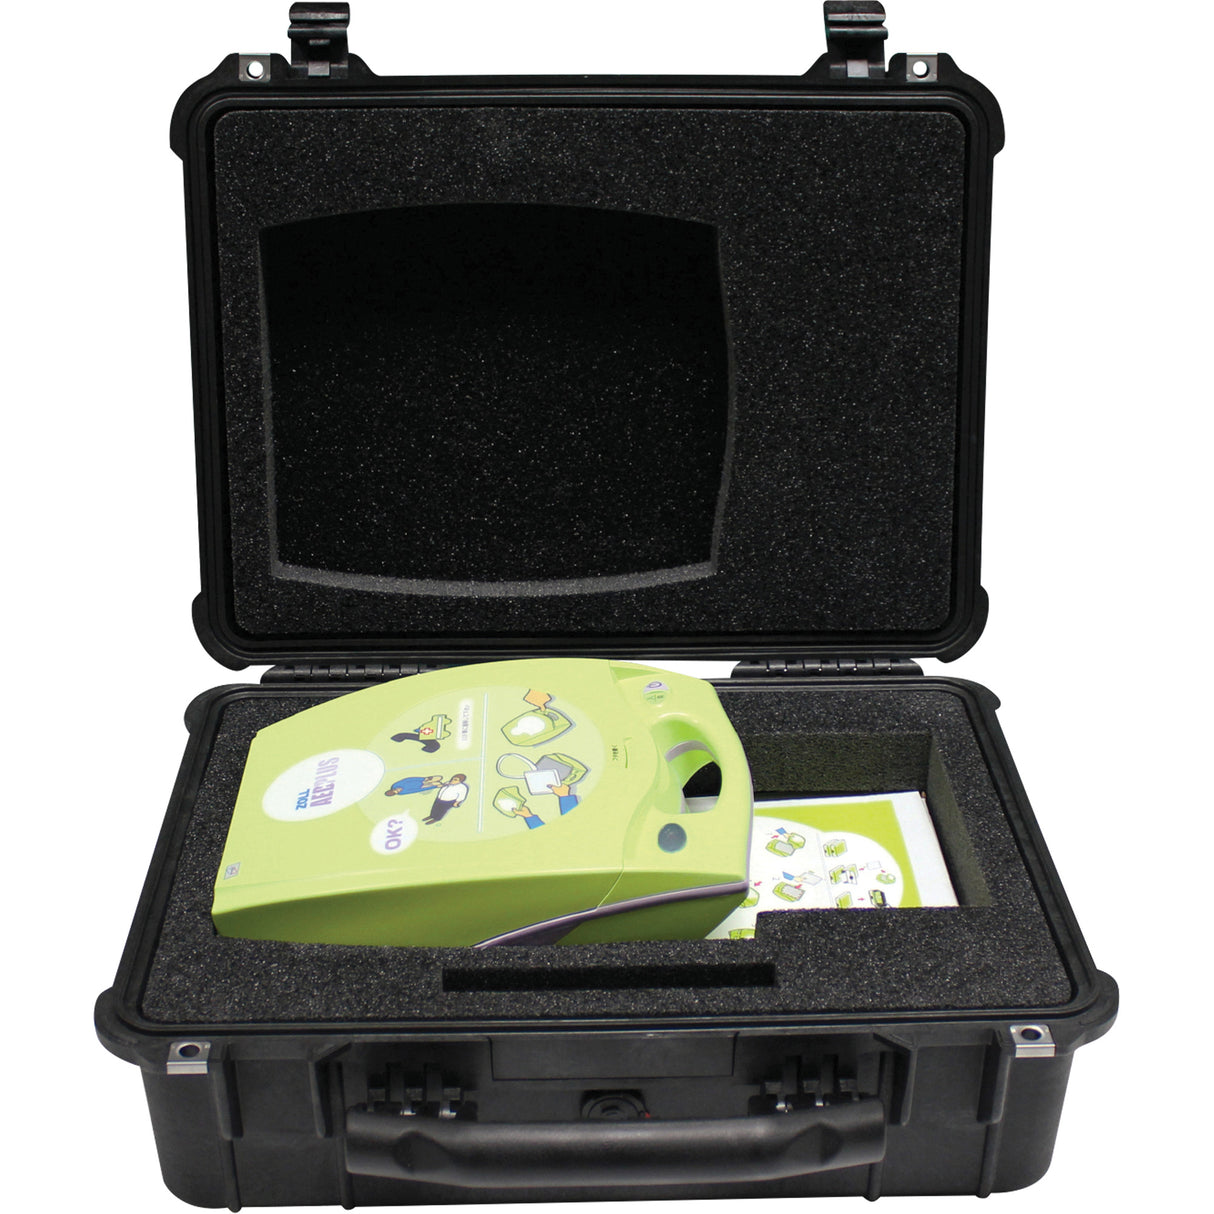 ZOLL AED Plus Large Pelican Case